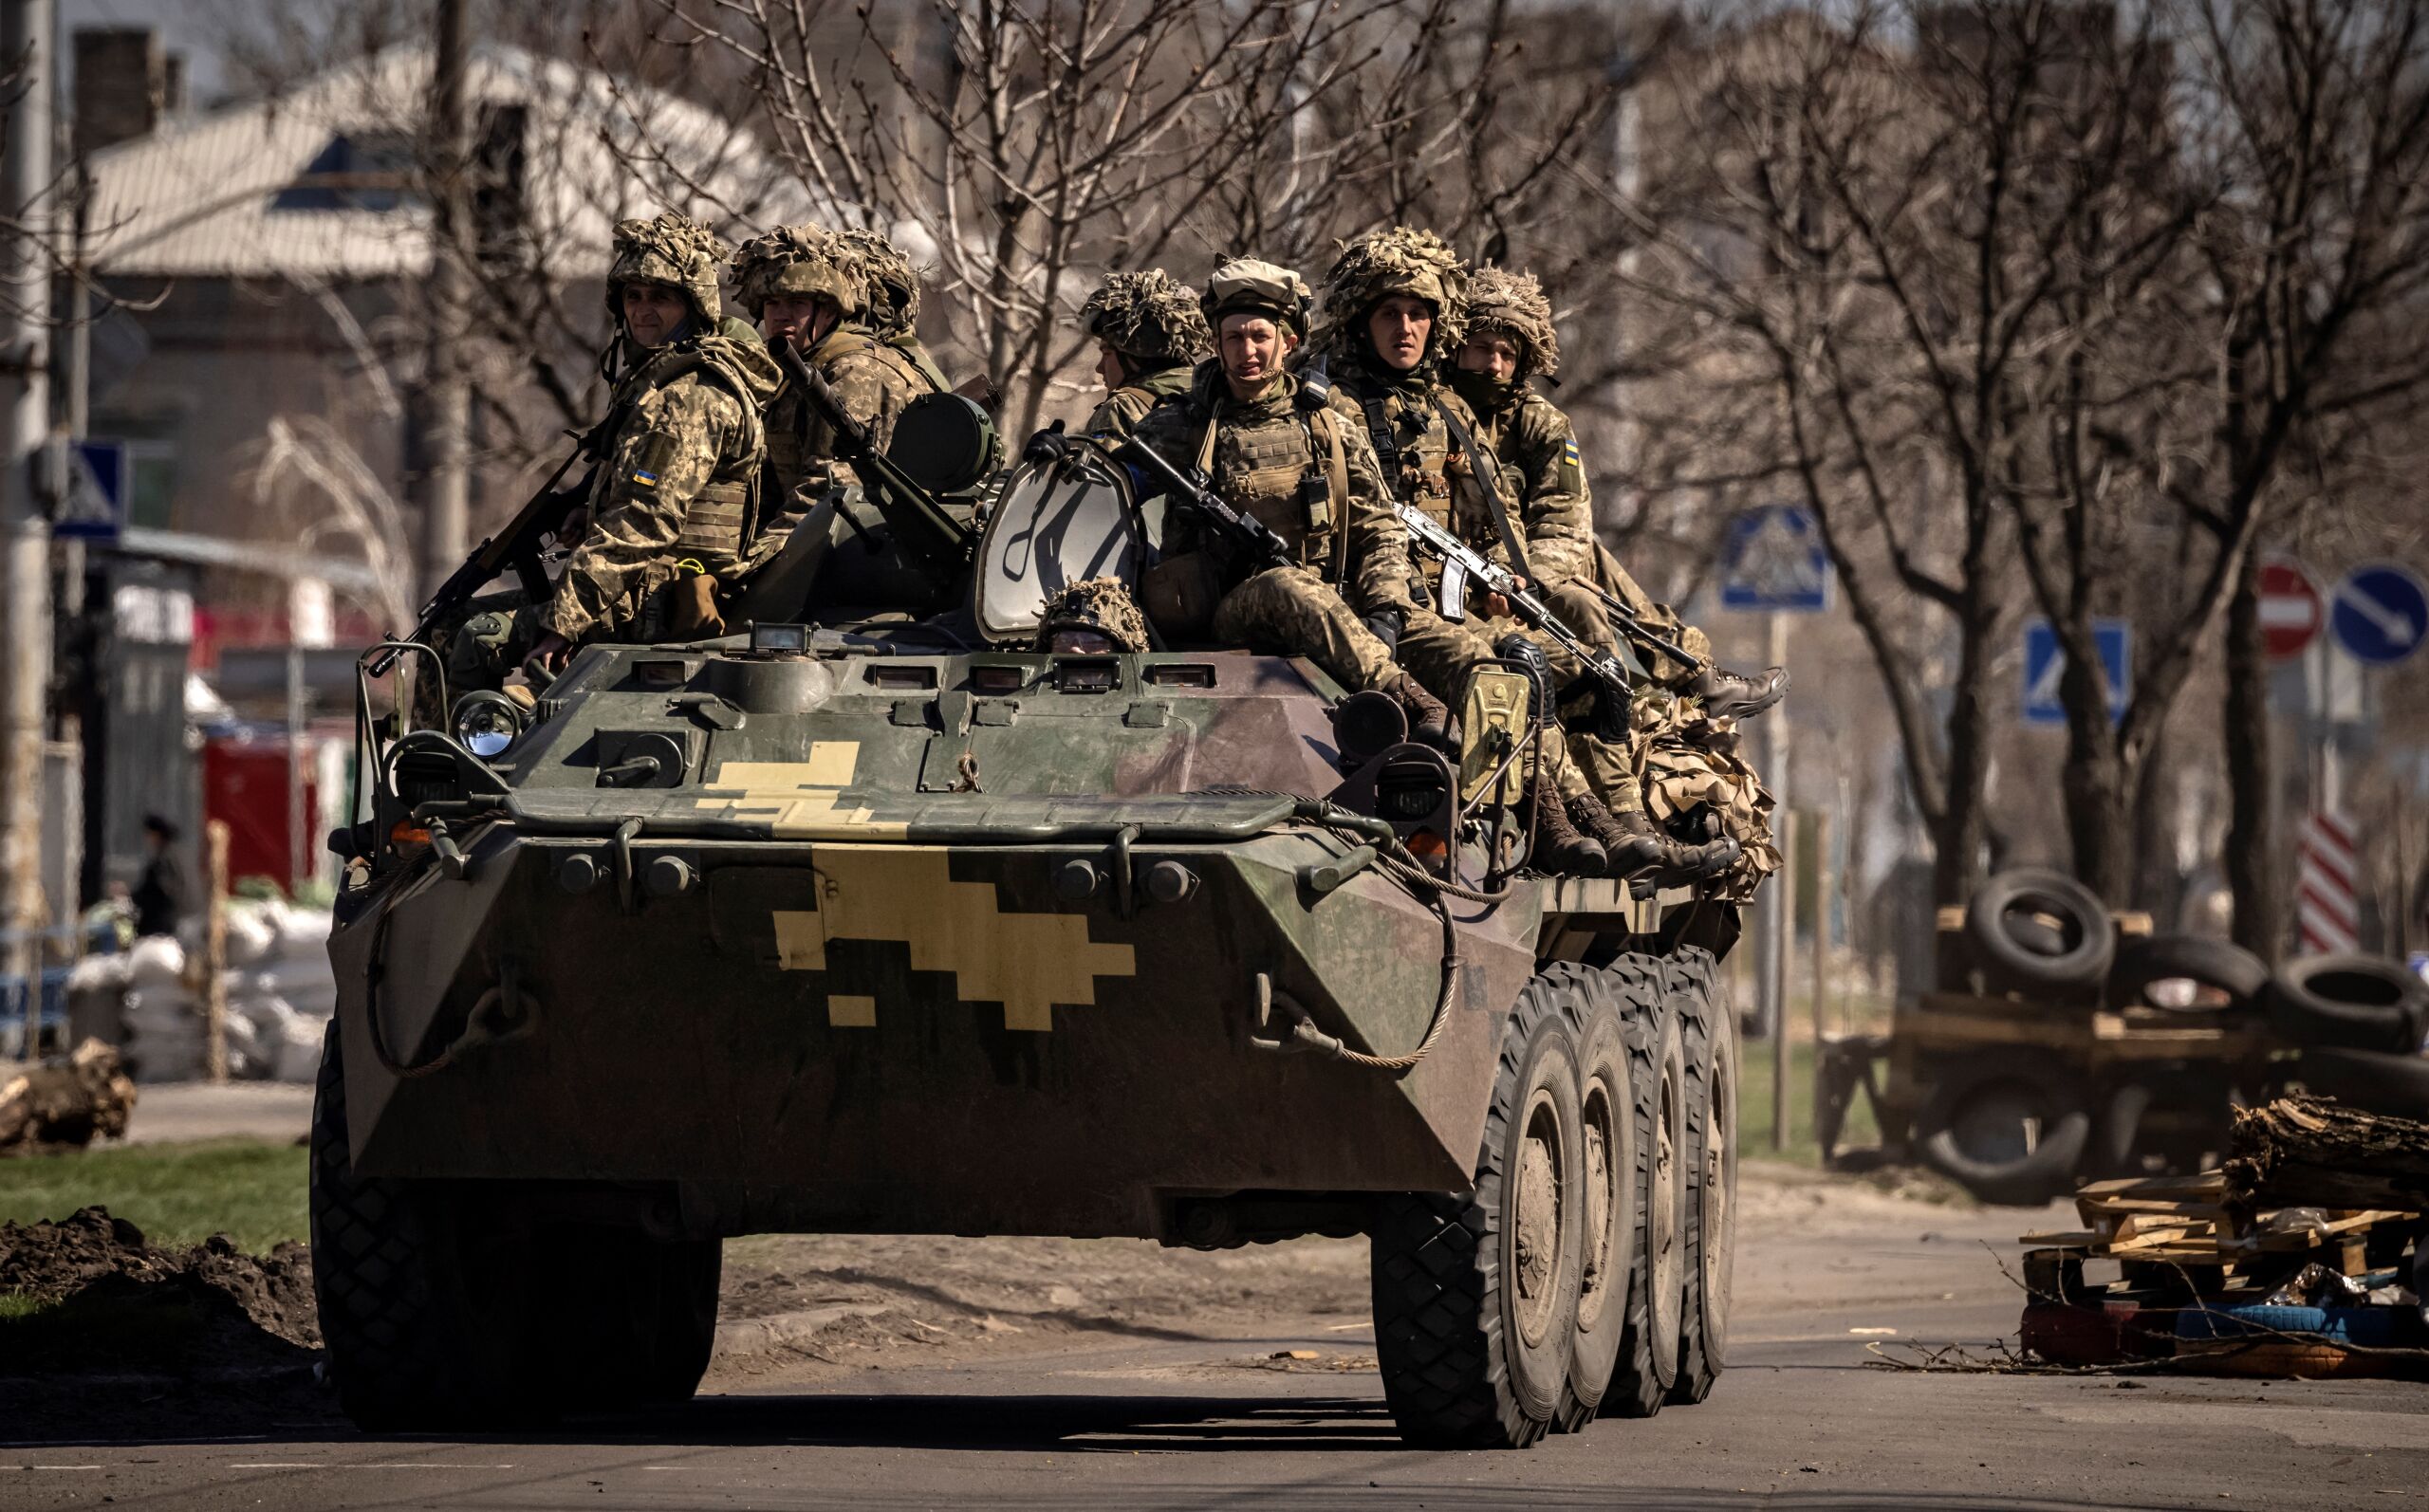 Ukrainian soldiers sit on a armoured military vehicule in the city of Severodonetsk, Donbas region, on April 7, 2022, amid Russia's military invasion launched on Ukraine.